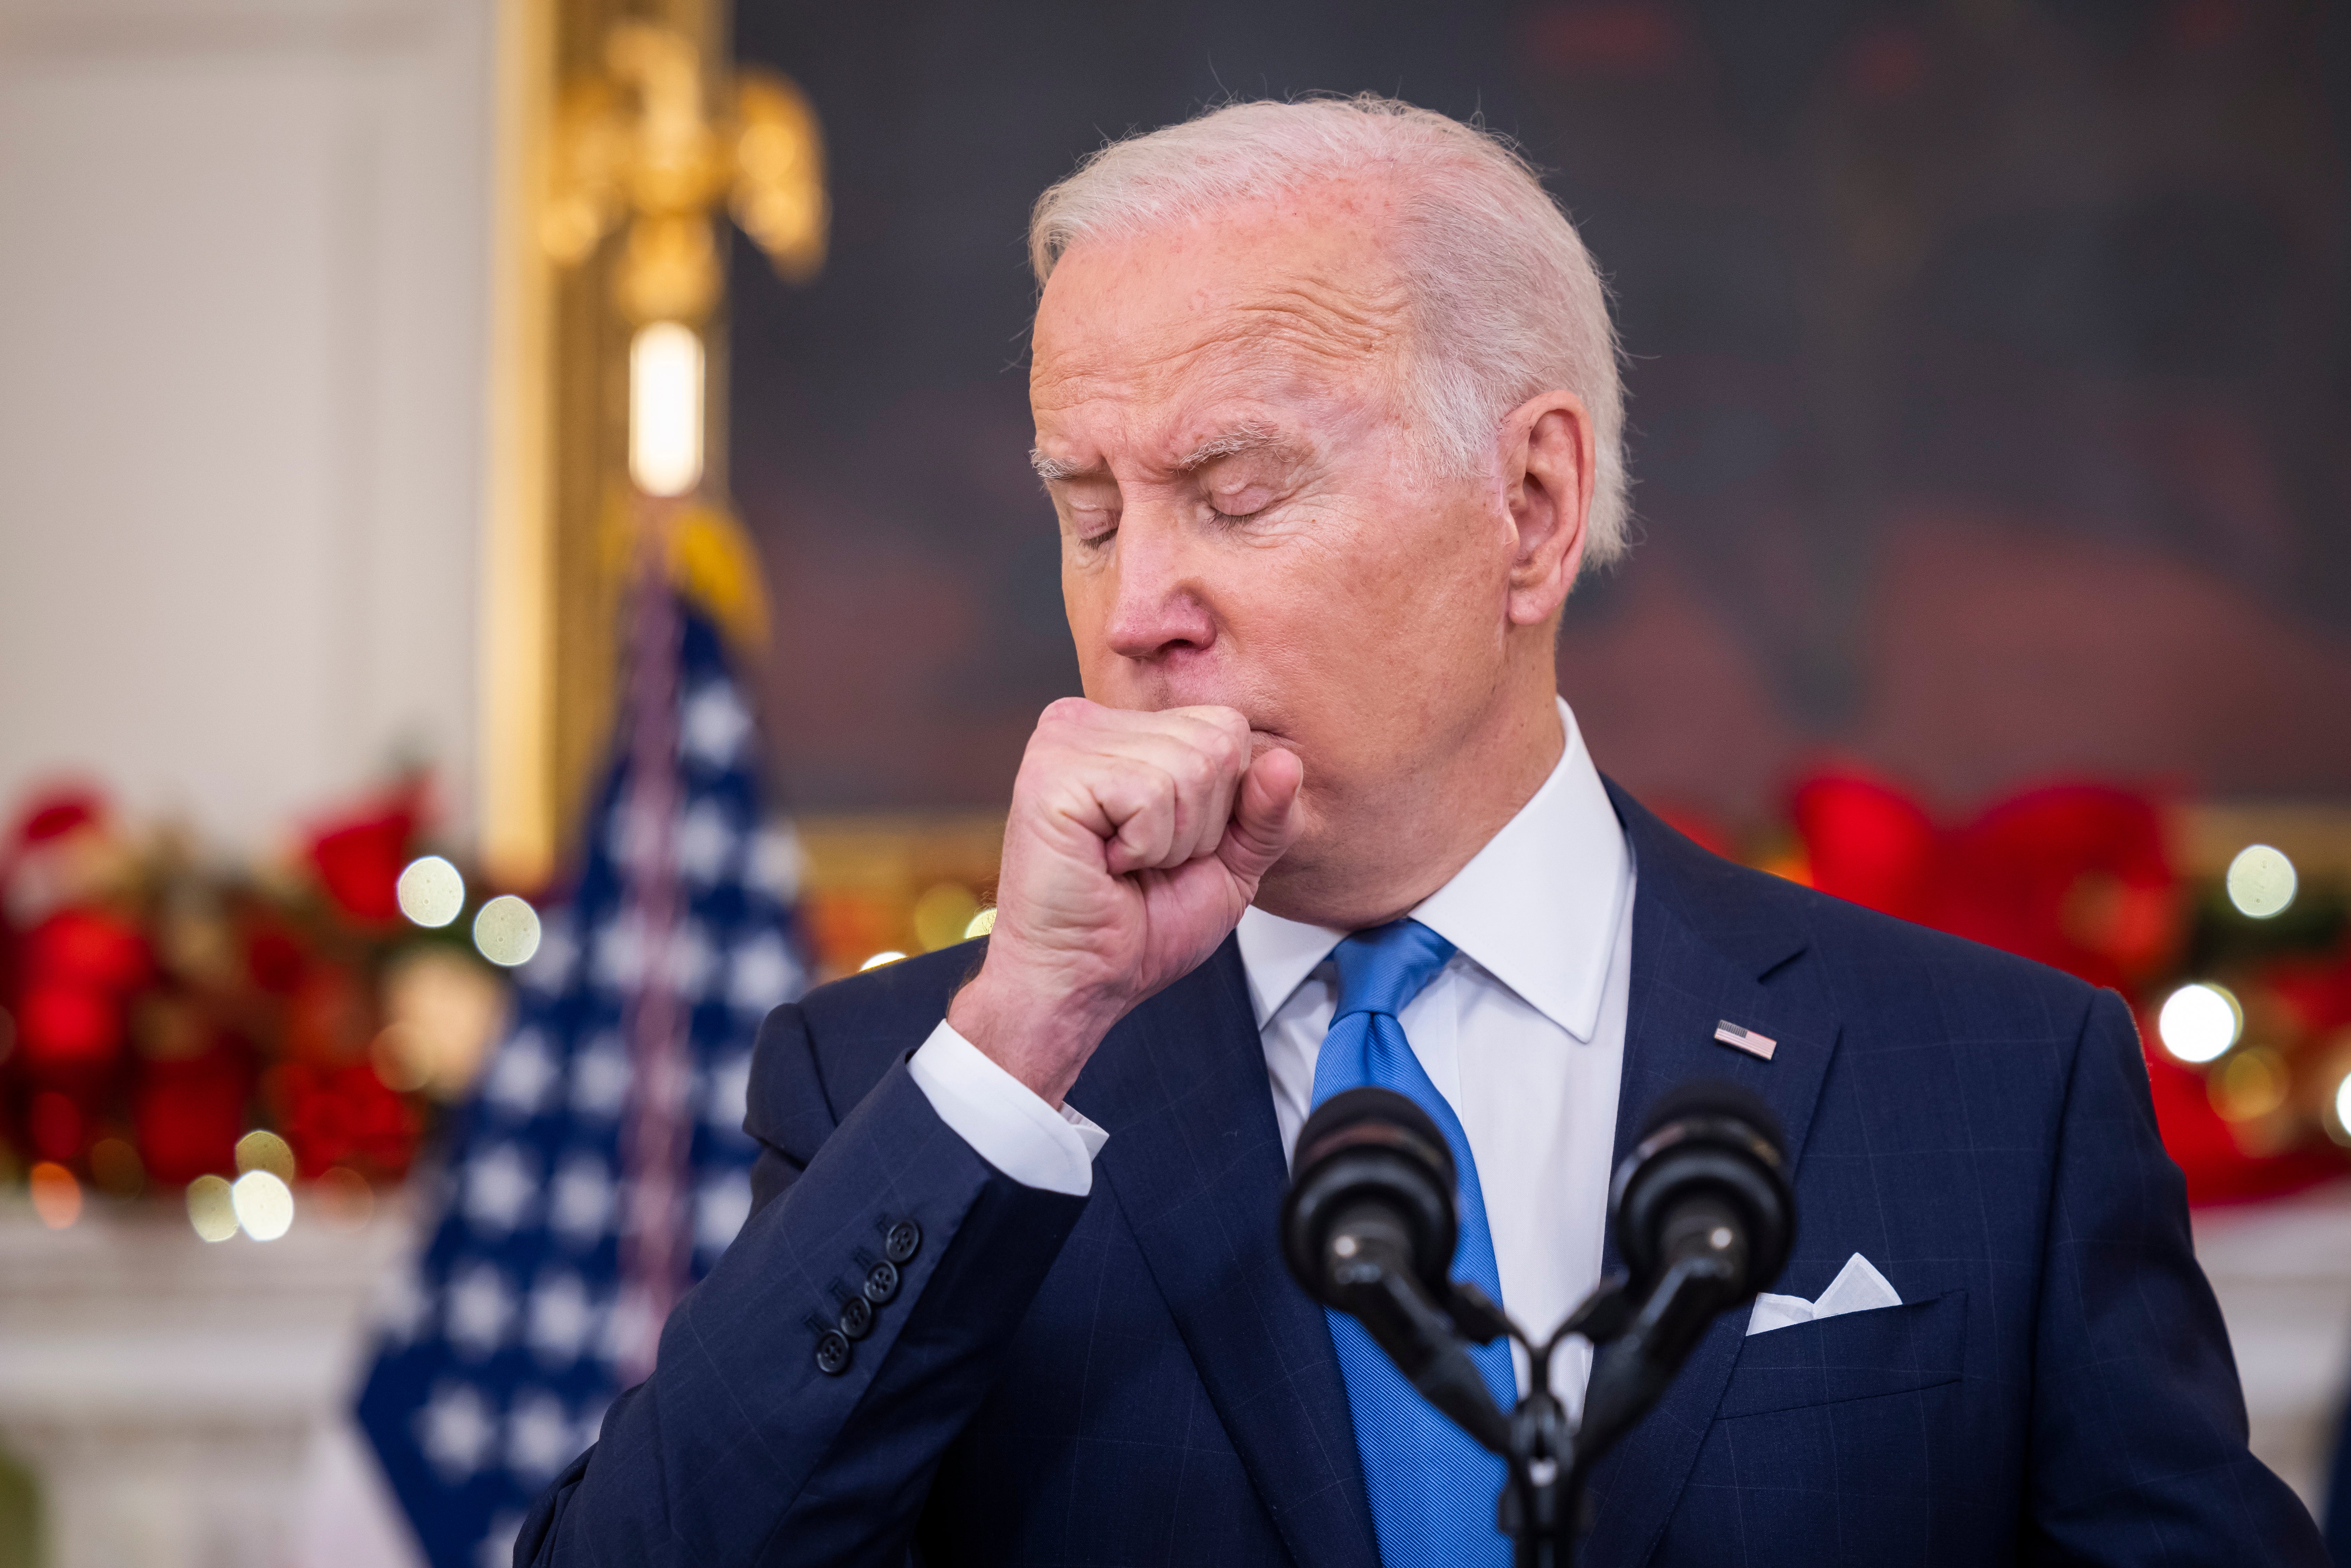 US president Joe Biden coughs while speaking on the Covid pandemic in the State Dining Room of the White House in Washington